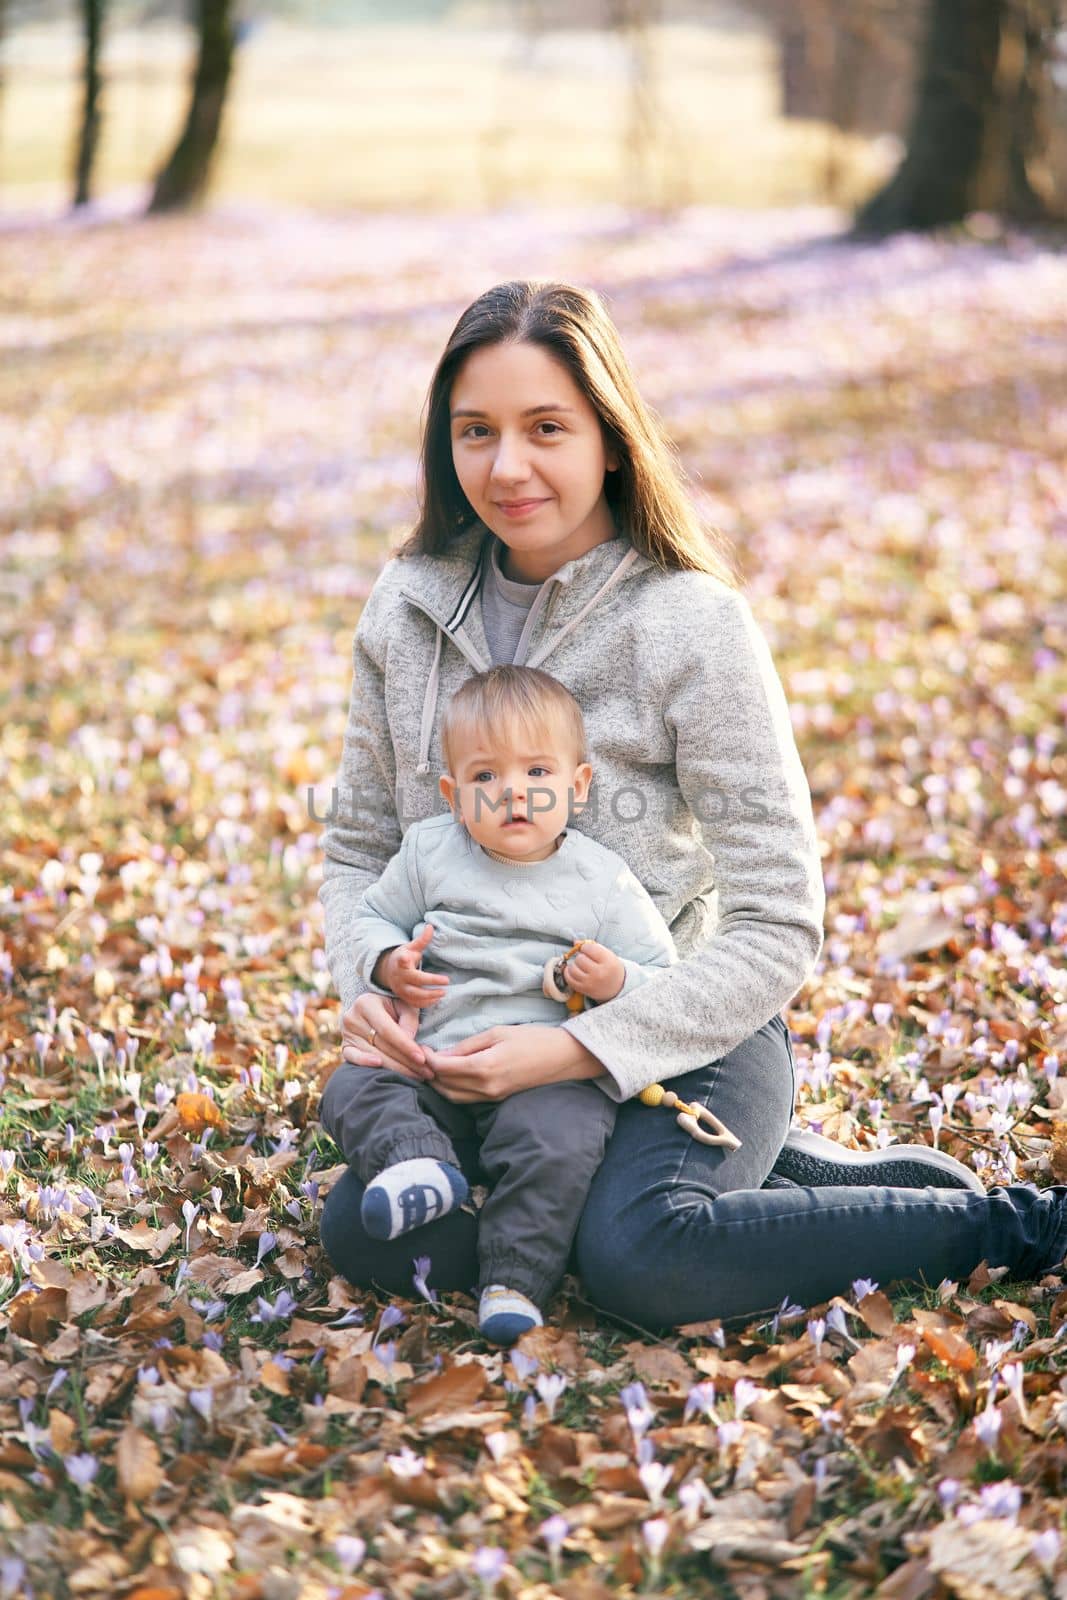 Smiling mother sits on fallen leaves and holds a baby with a rattle in her arms. High quality photo